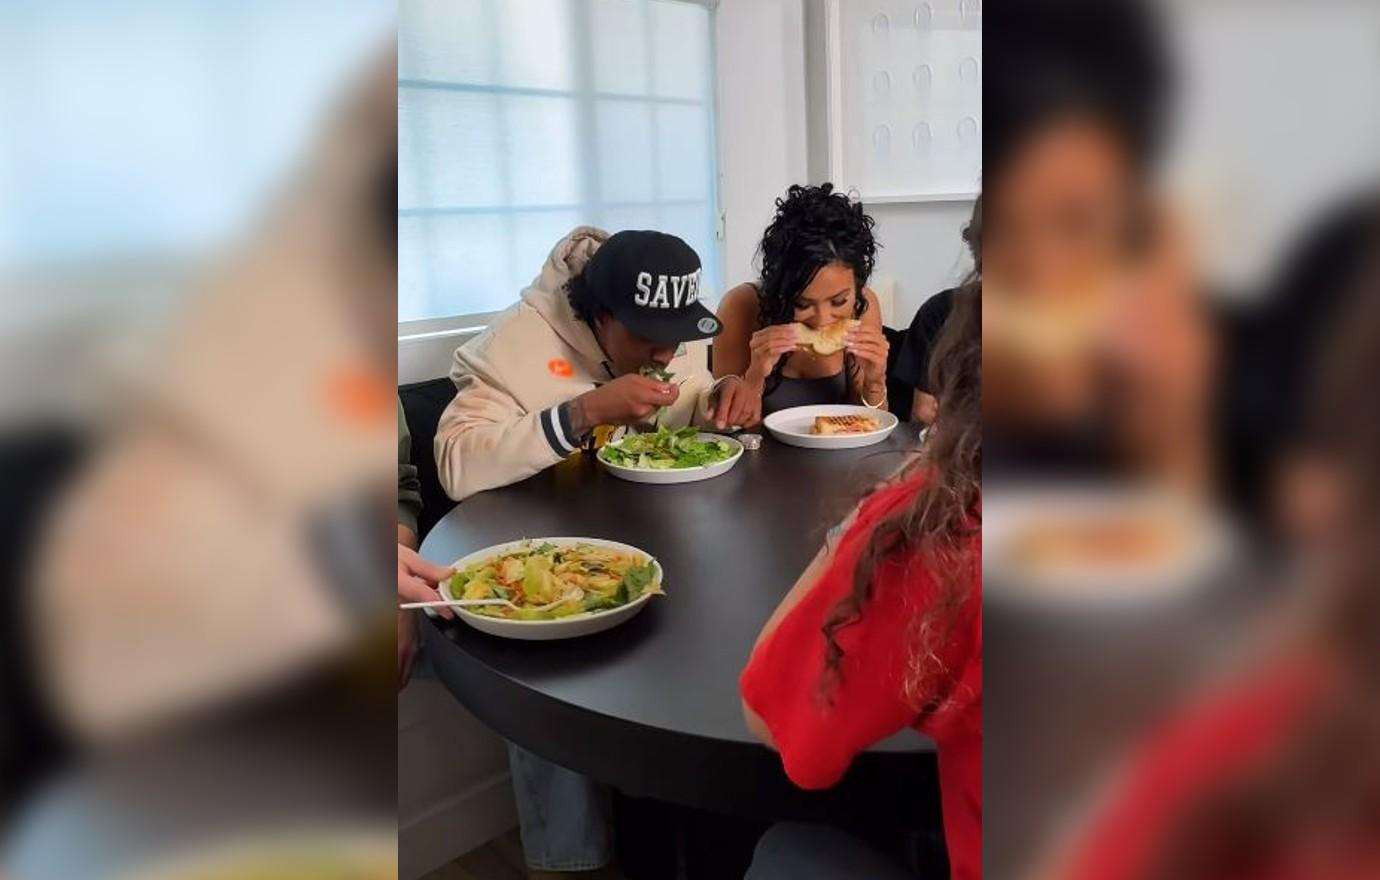 Dad-Of-12 Nick Cannon Trolled After Viral Skit With Baby Mama Bre Tiesi